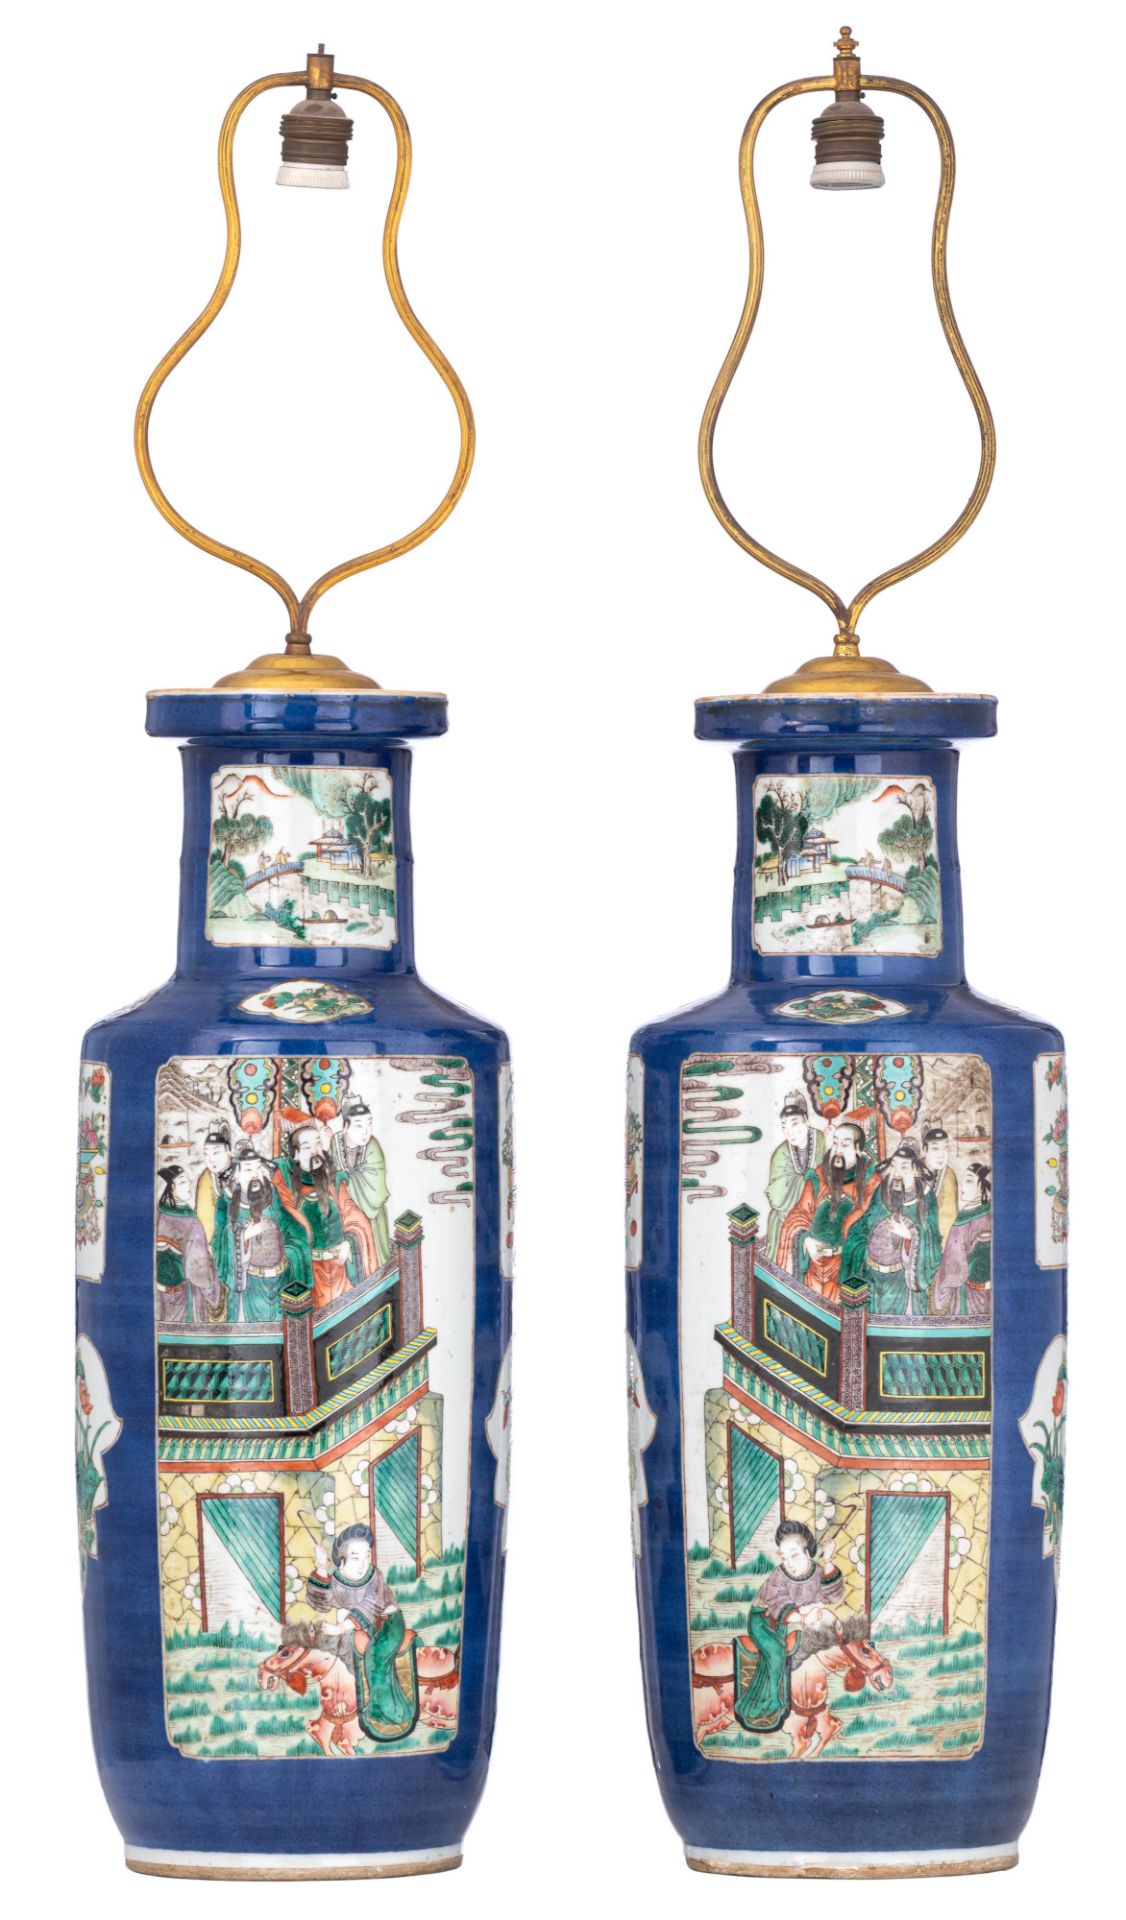 A pair of Chinese bleu poudré ground and famille verte rouleau vases, with a Qianlong mark, 19thC, H